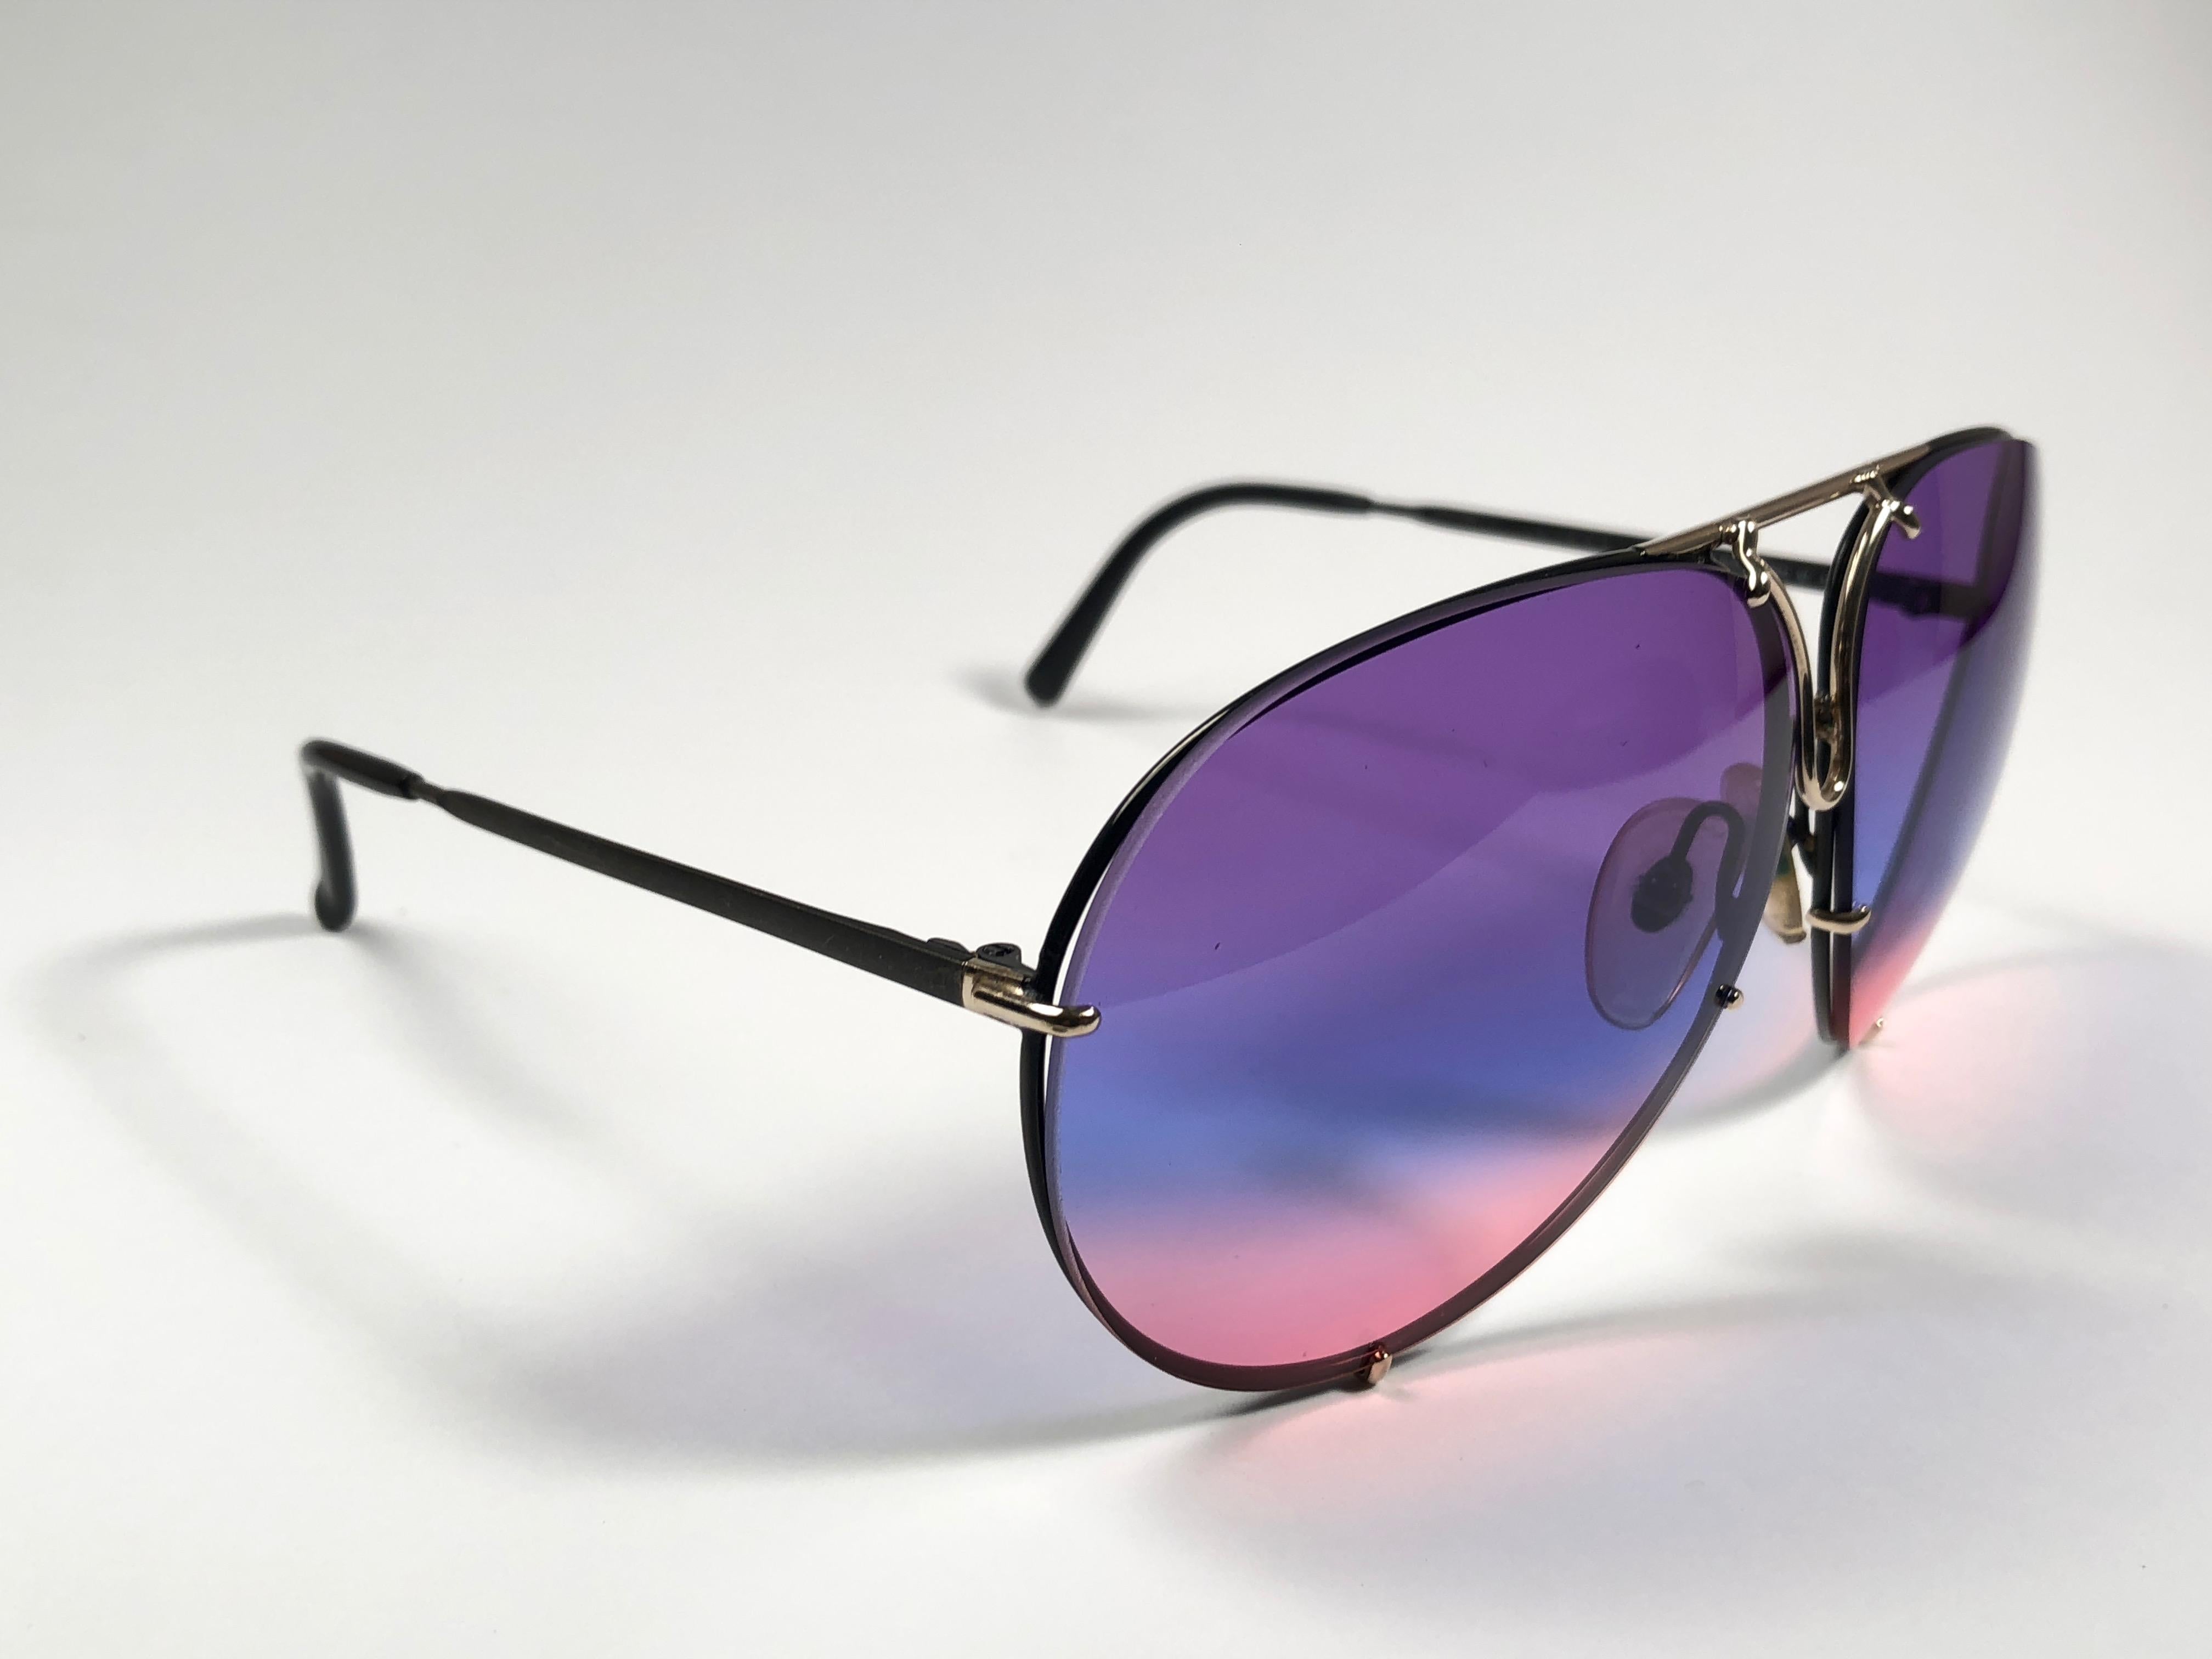 New 1980's Porsche Design 5623 frame with rainbow lenses.  Amazing craftsmanship and quality.  
Comes with the original black Porsche hard case thats has some wear on it due to nearly 40 years of storage. 
New, never worn. This item may show minor